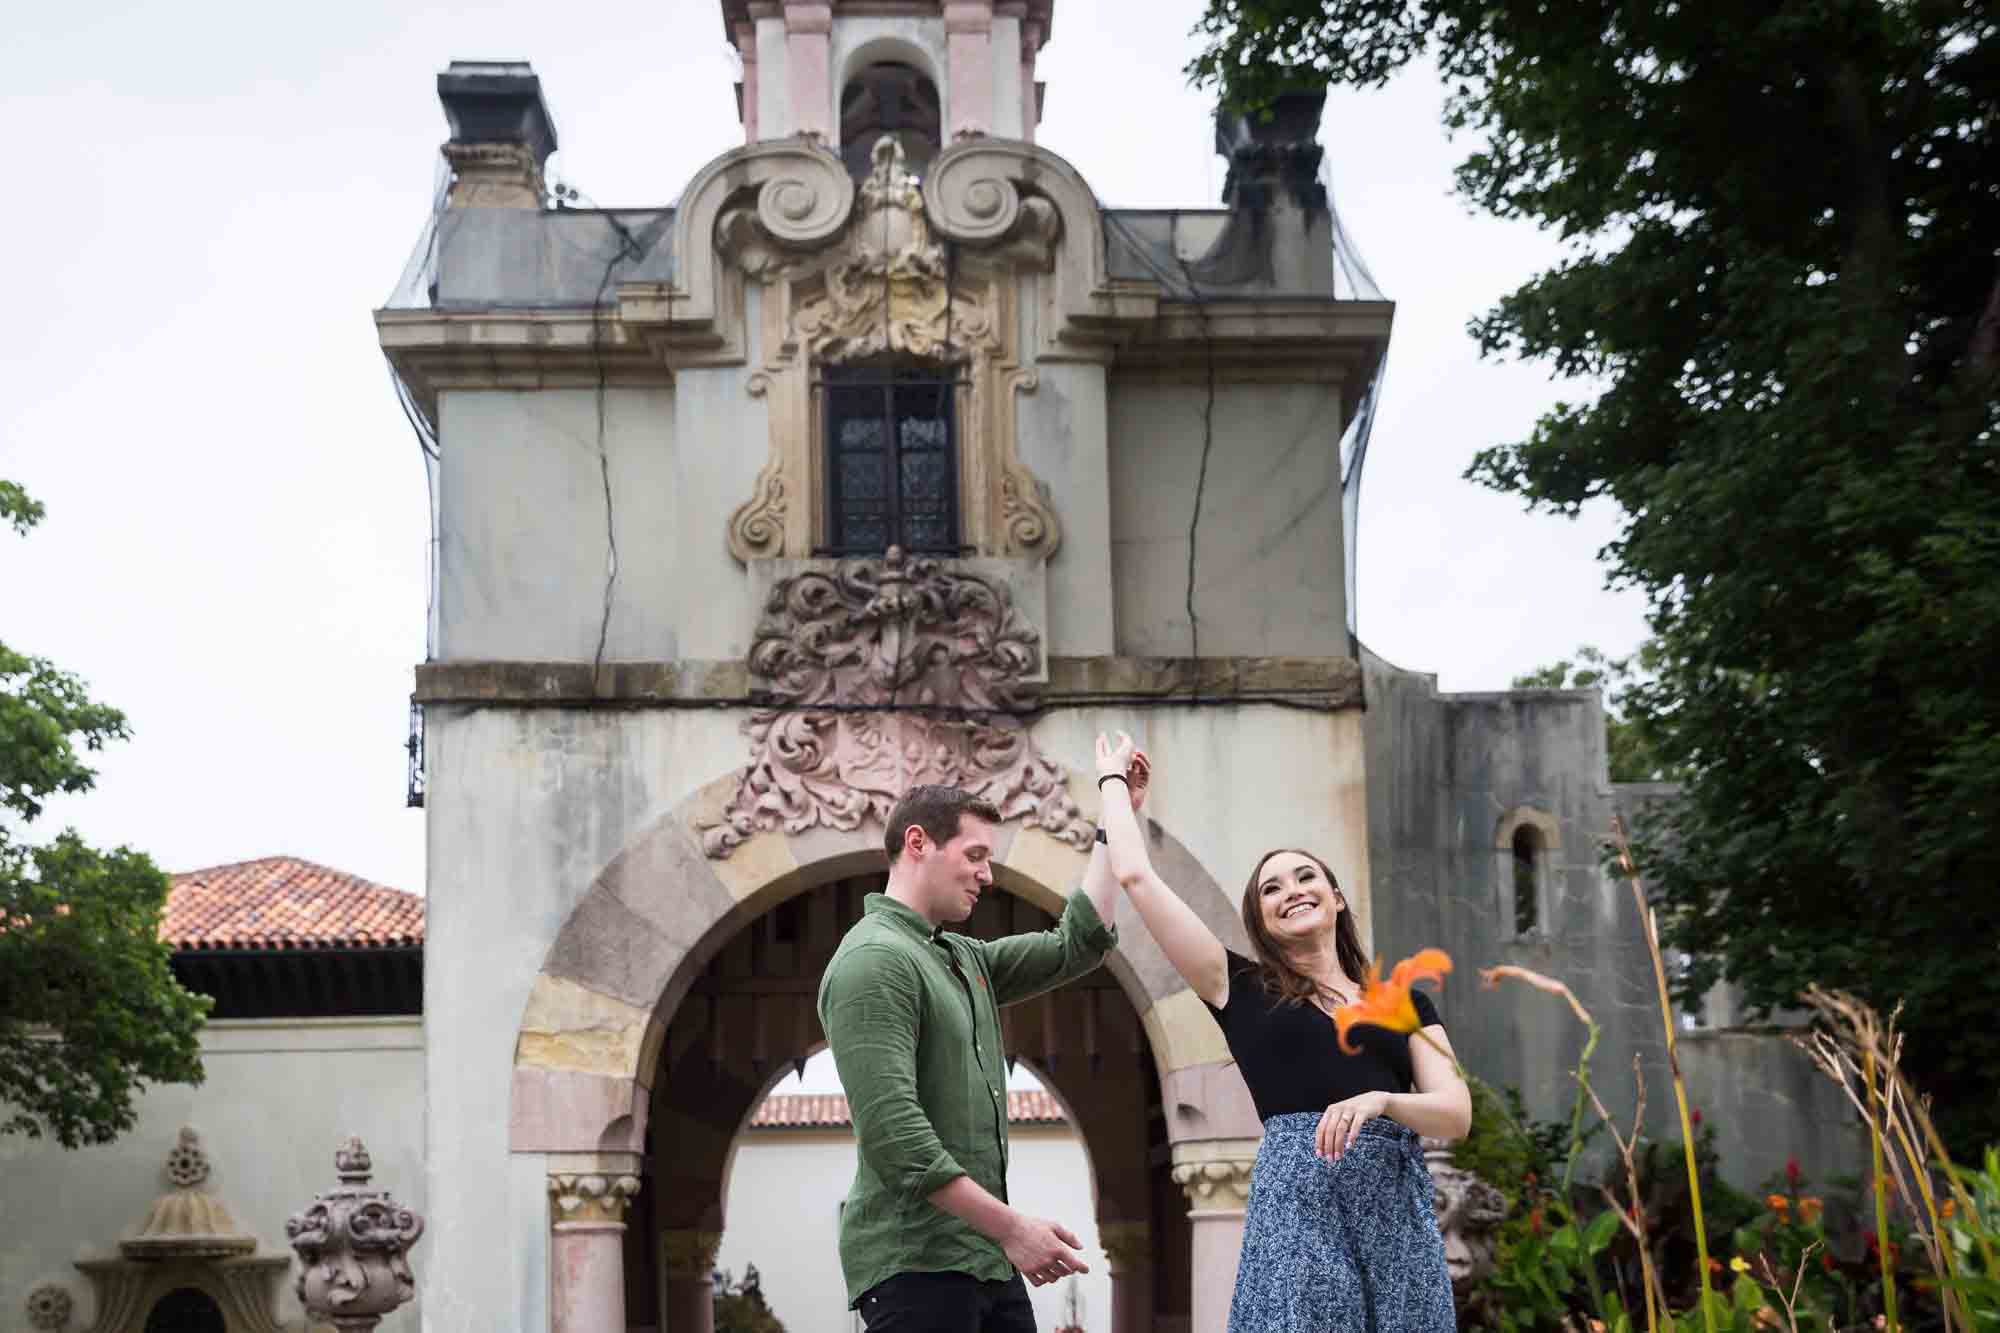 Couple dancing in front of gate at the Vanderbilt Museum